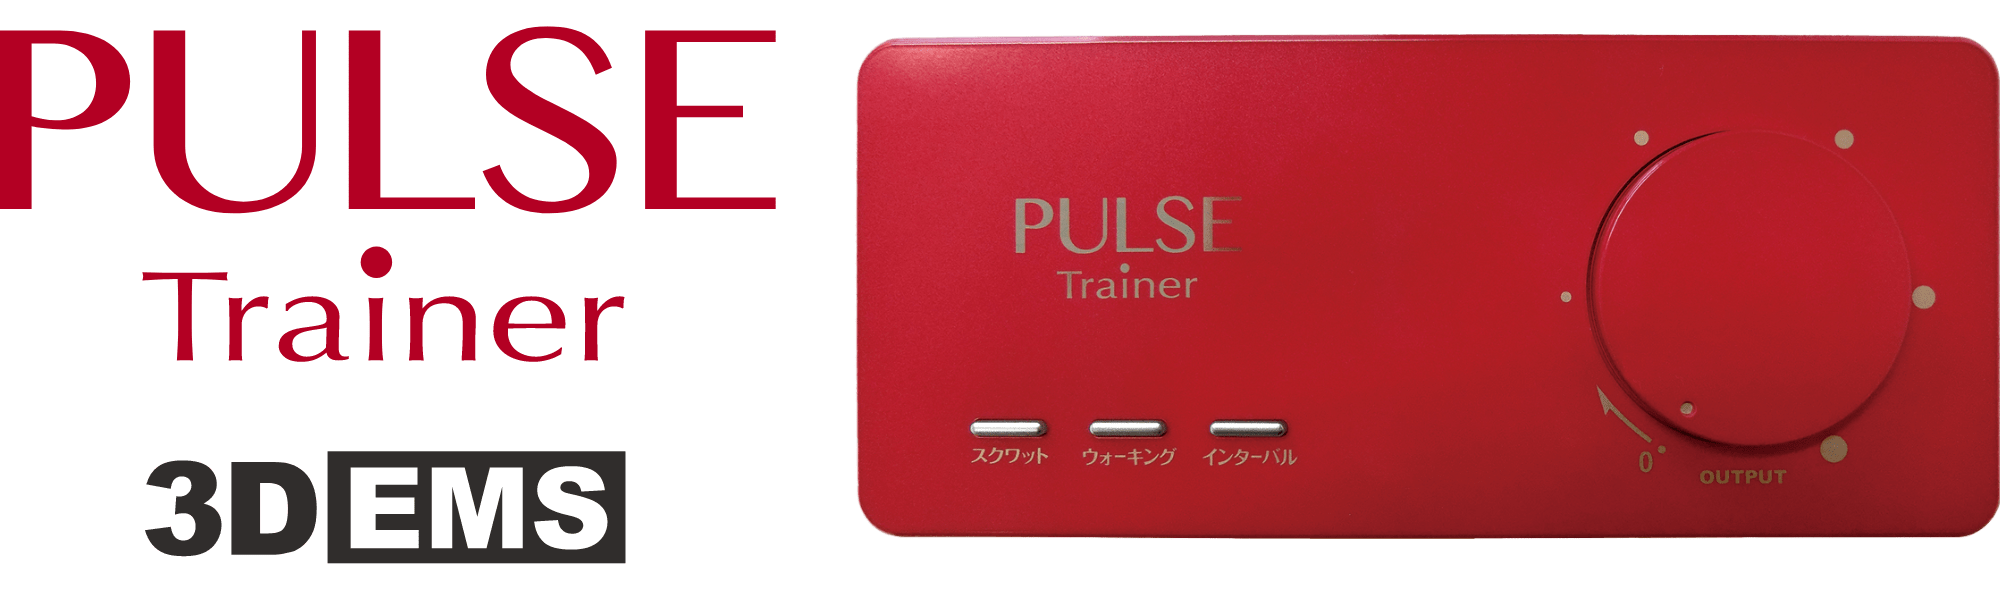 Pulse Trainer 3DEMS